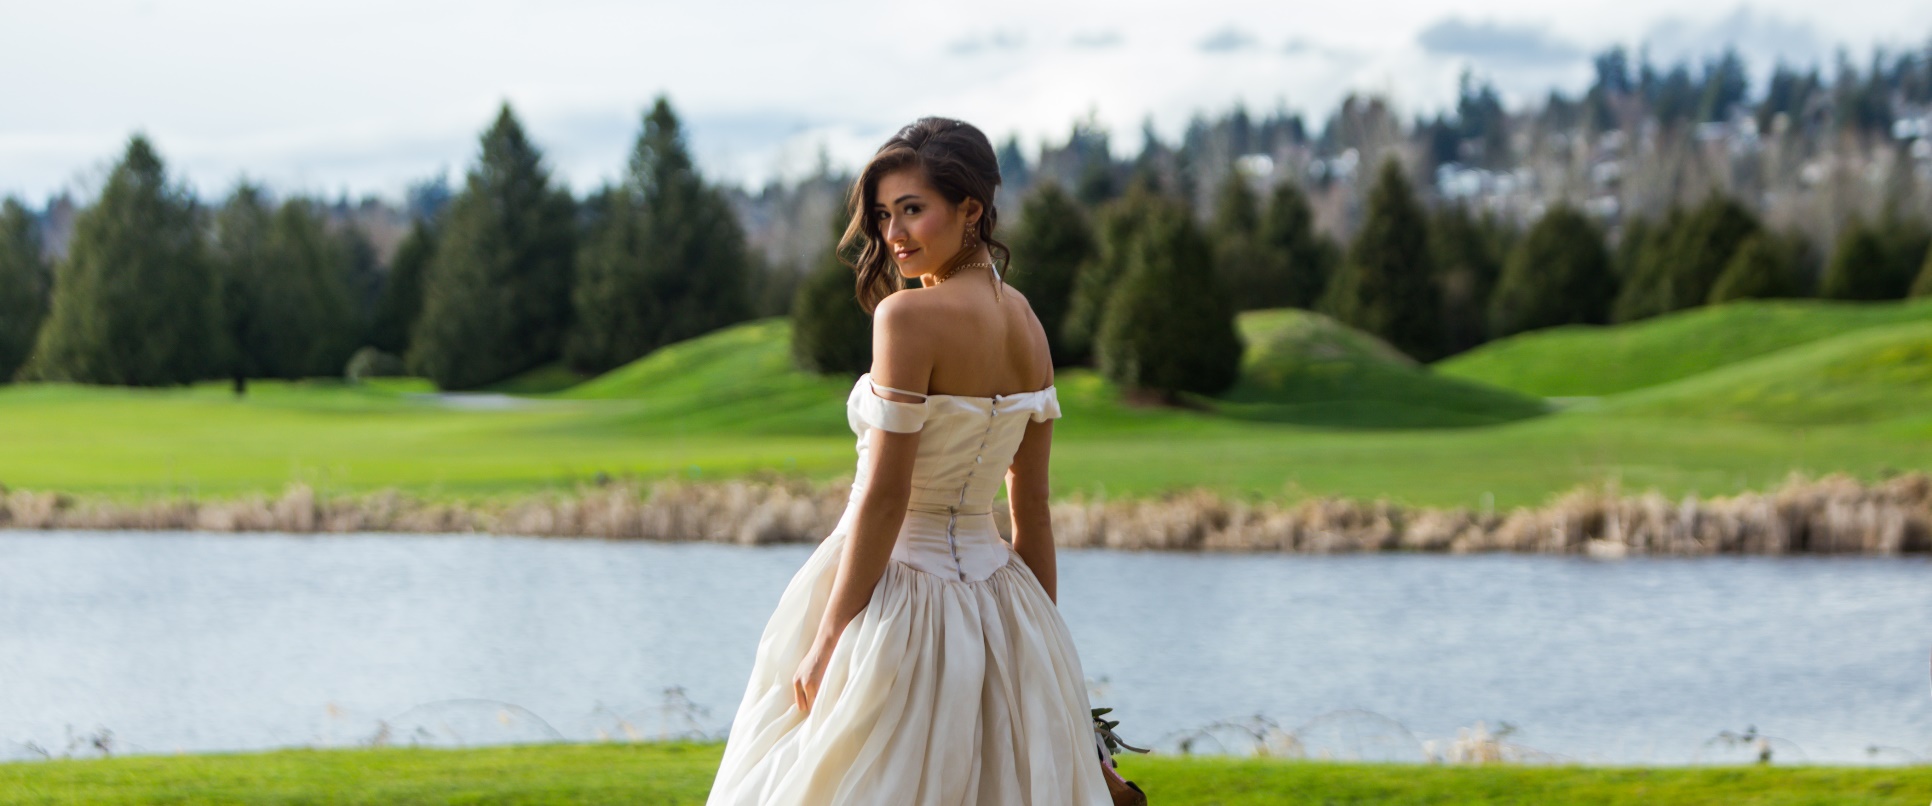 Bride posing for wedding photos overlooking the lake at the Golf Course